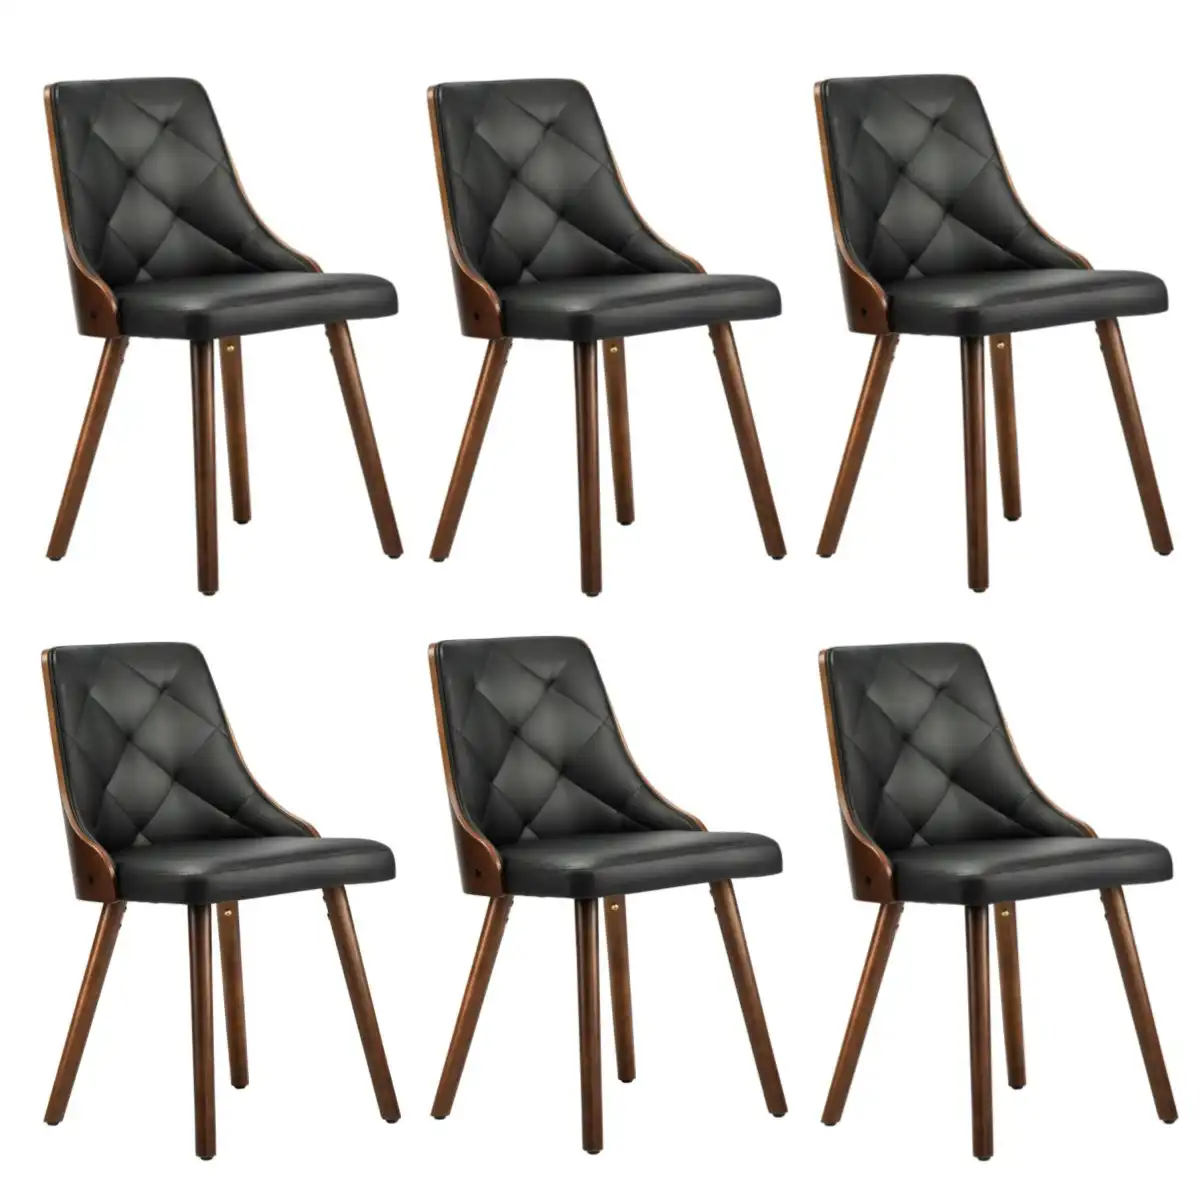 Oikiture 6x Dining Chairs Wooden Chair Kitchen Cafe Faux Leather Padded Black